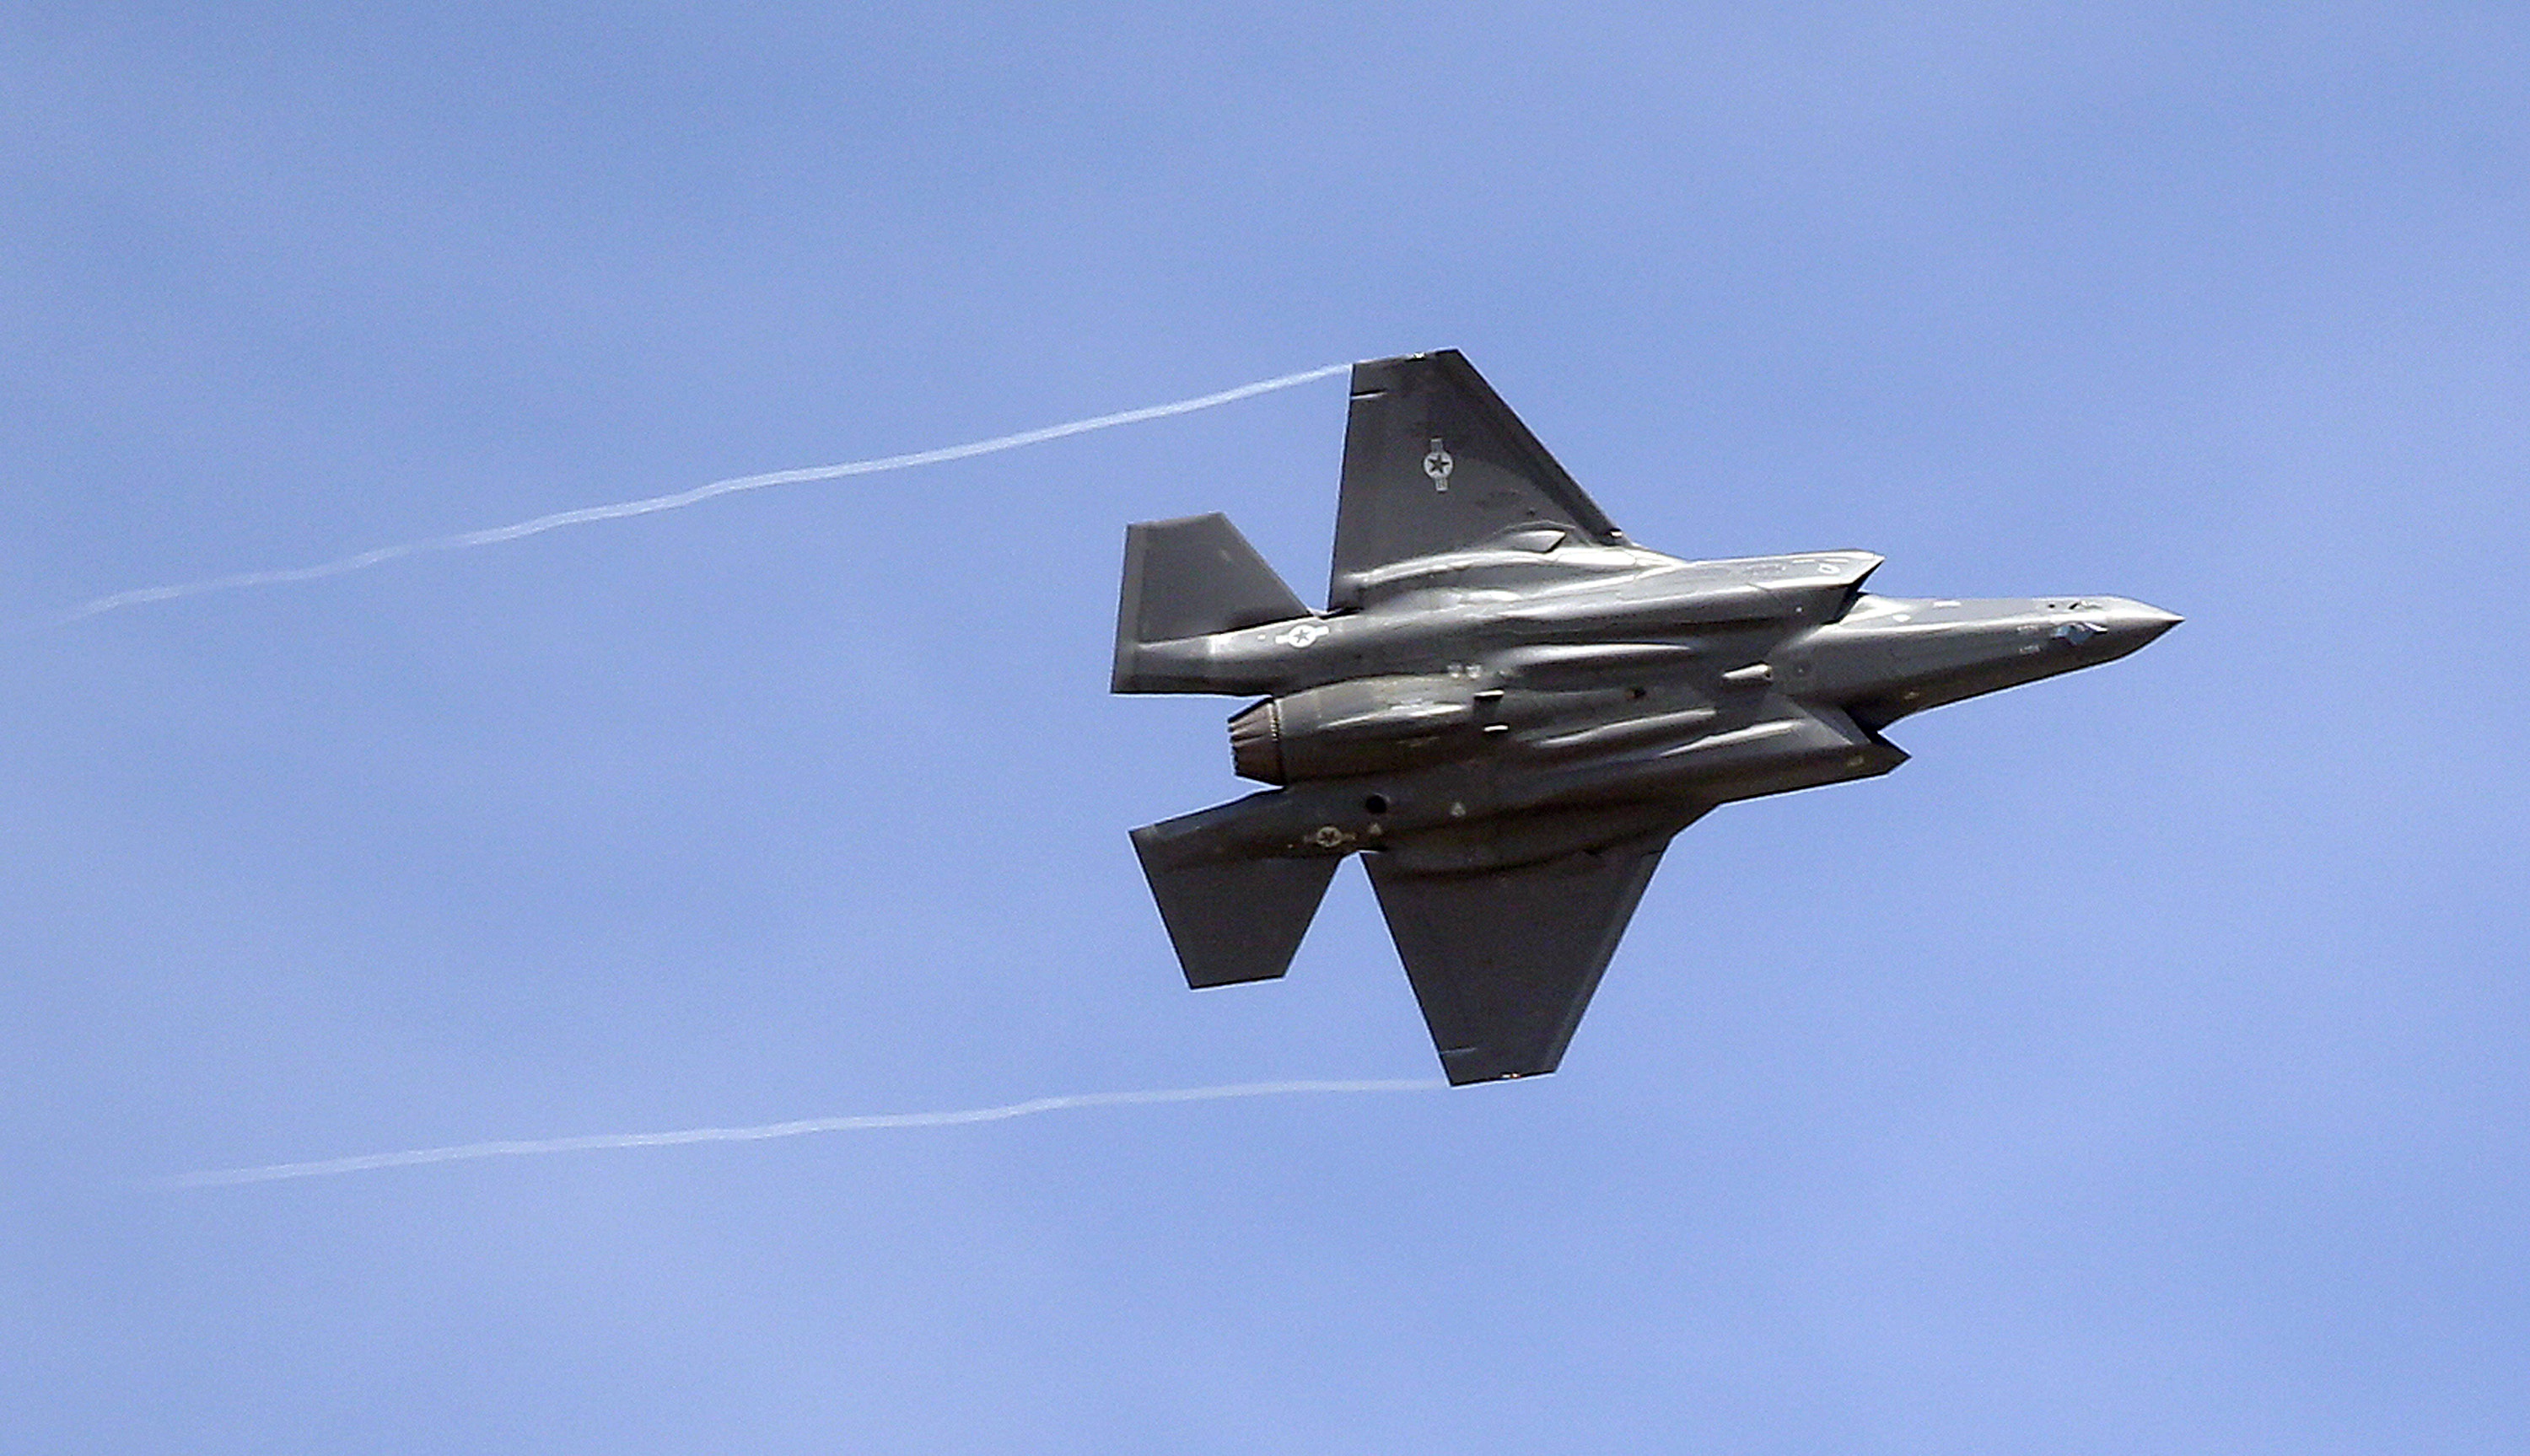 Singapore says it will buy 4 F-35 jets in fleet upgrade